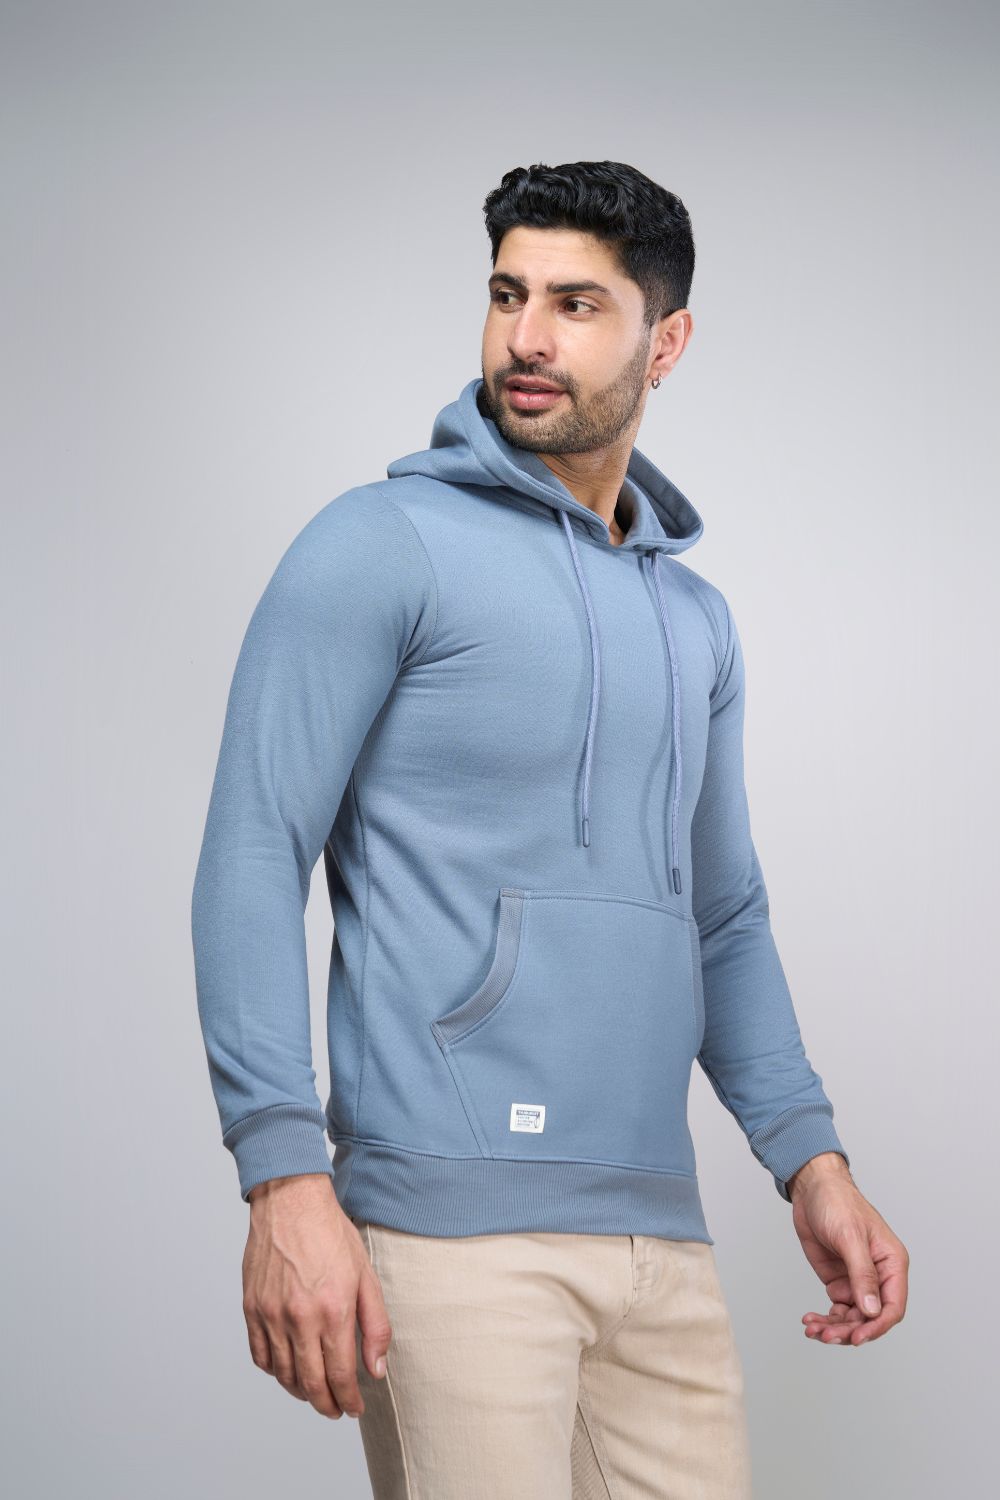 Niagara colored, hoodie for men with full sleeves and relaxed fit, side view.